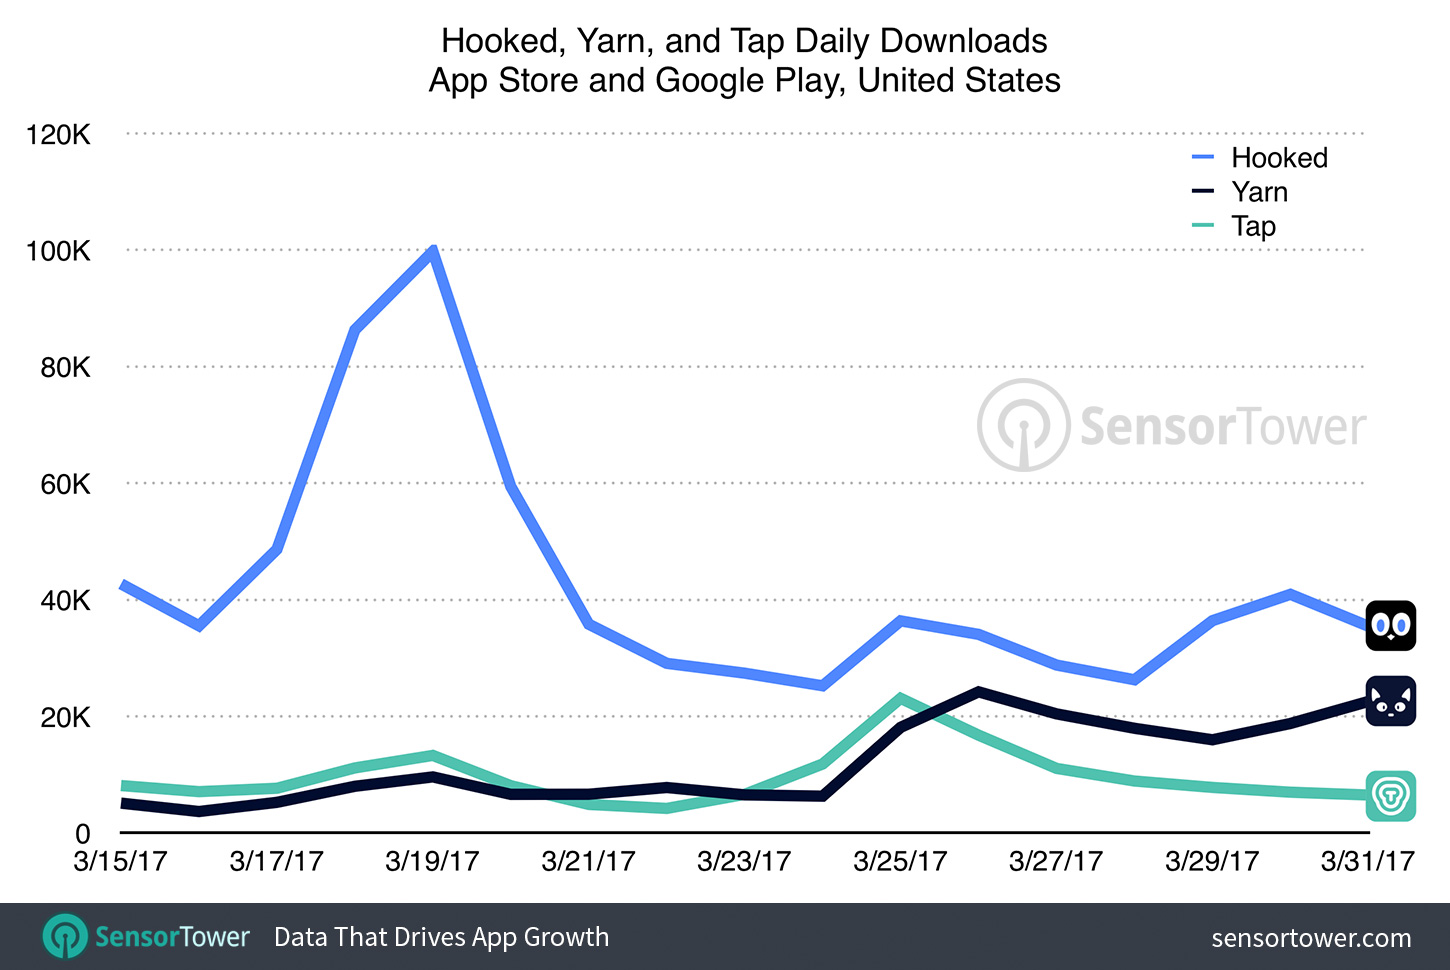 Daily downloads of Hooked, Yarn, and Tap apps on iOS and Google Play in the United States